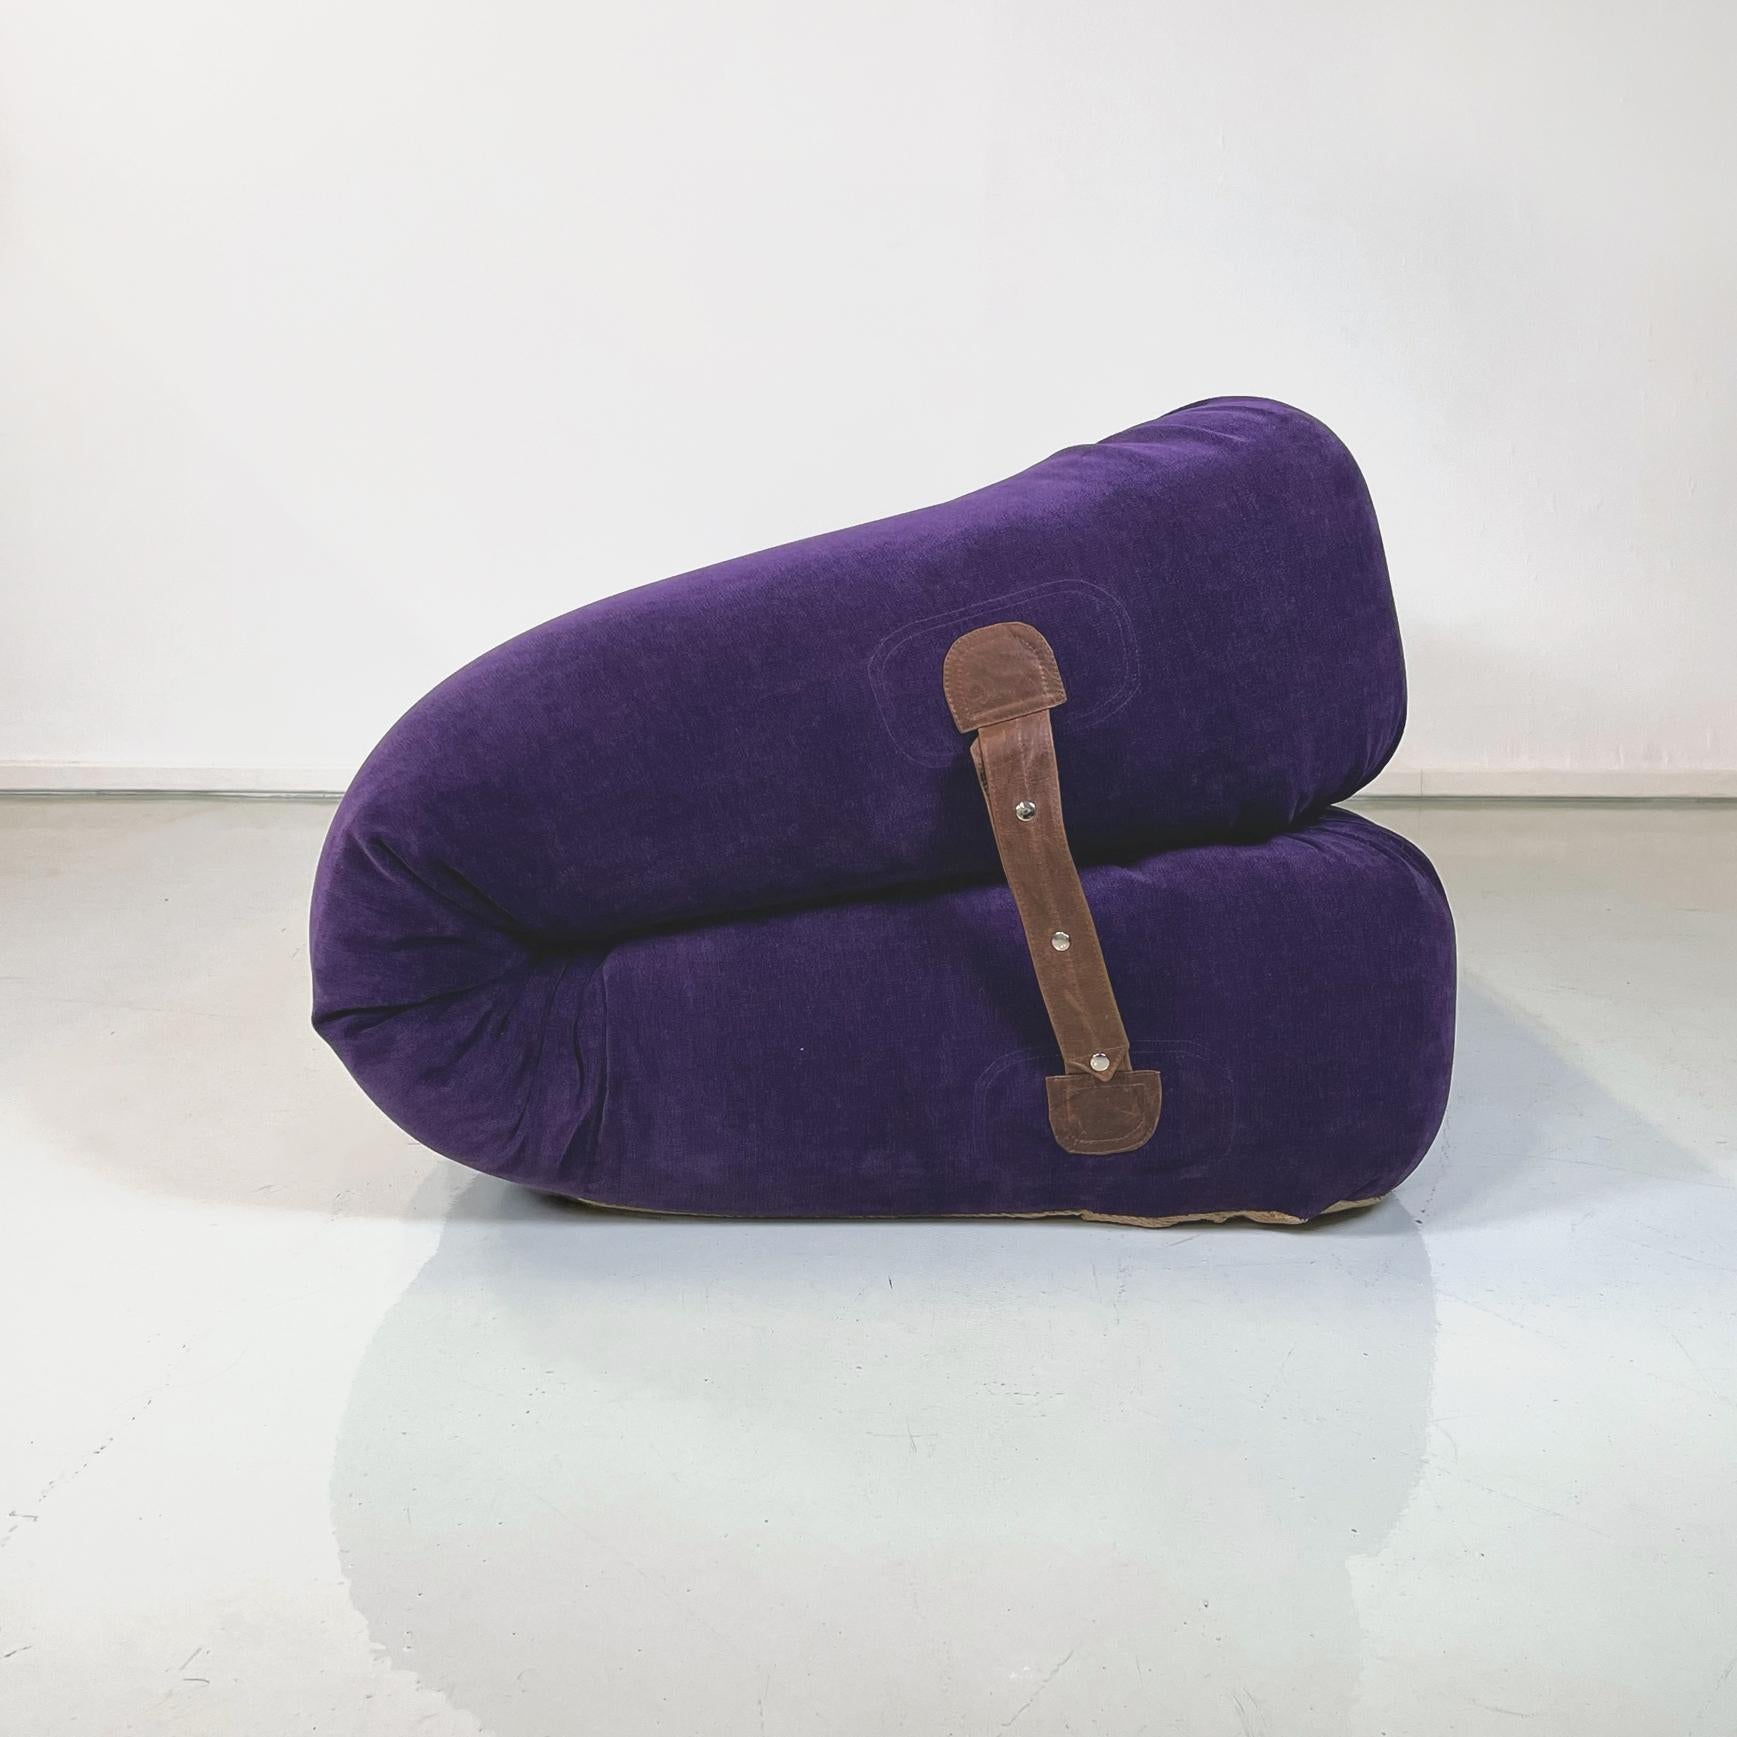 Late 20th Century Italian Modern Purple Velvet Sofa Bed Anfibio by Becchi for Giovannetti, 1970s For Sale